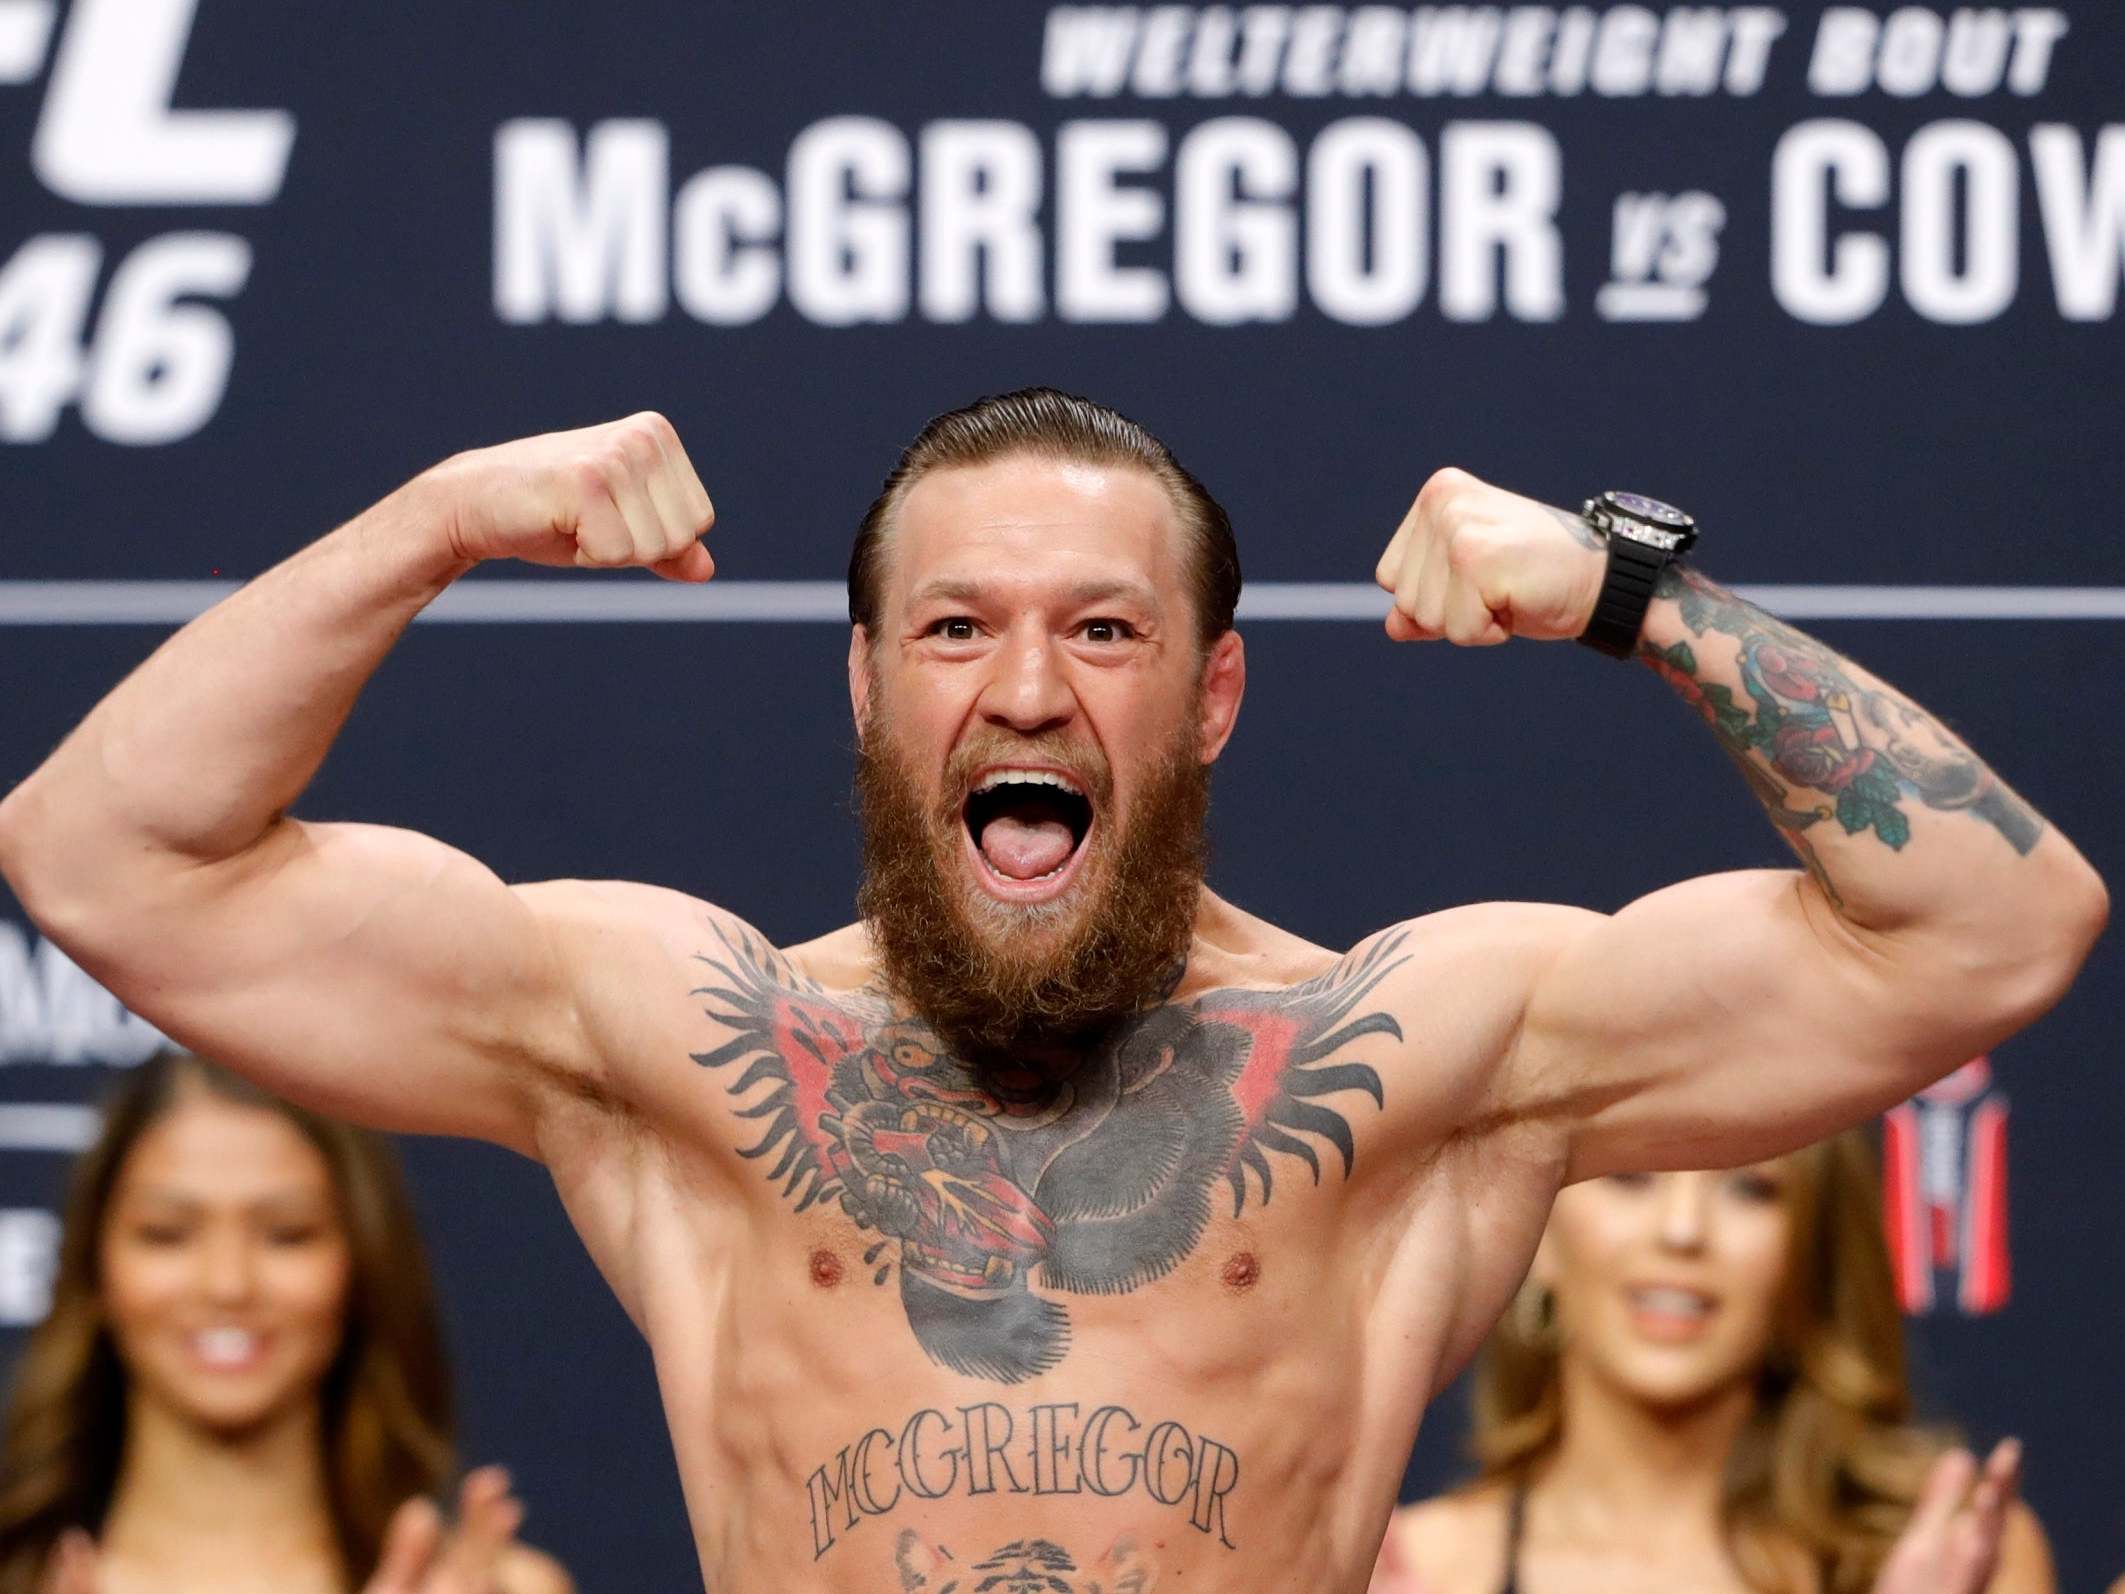 McGregor will pay serious price for media day incident - Yahoo Sports